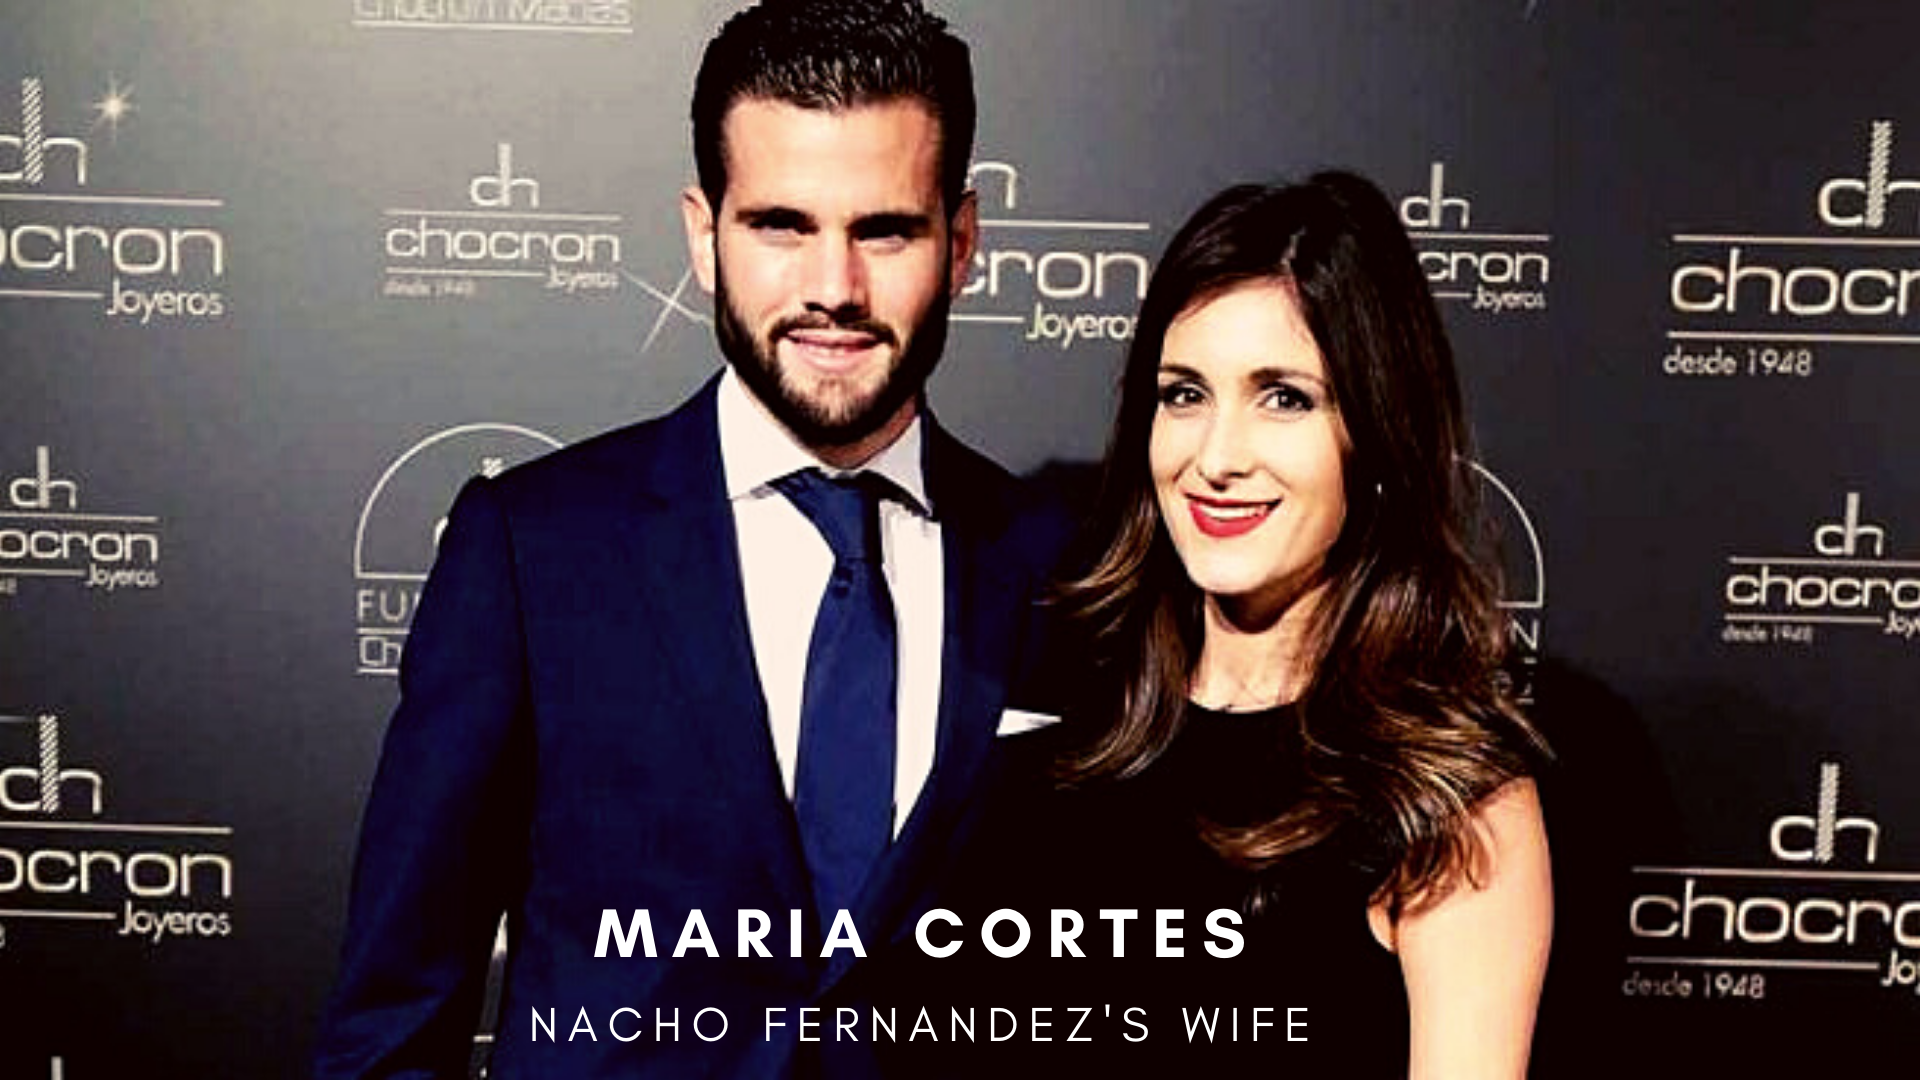 Nacho Fernandez with wife Maria Cortes. (Credit: Getty Images)